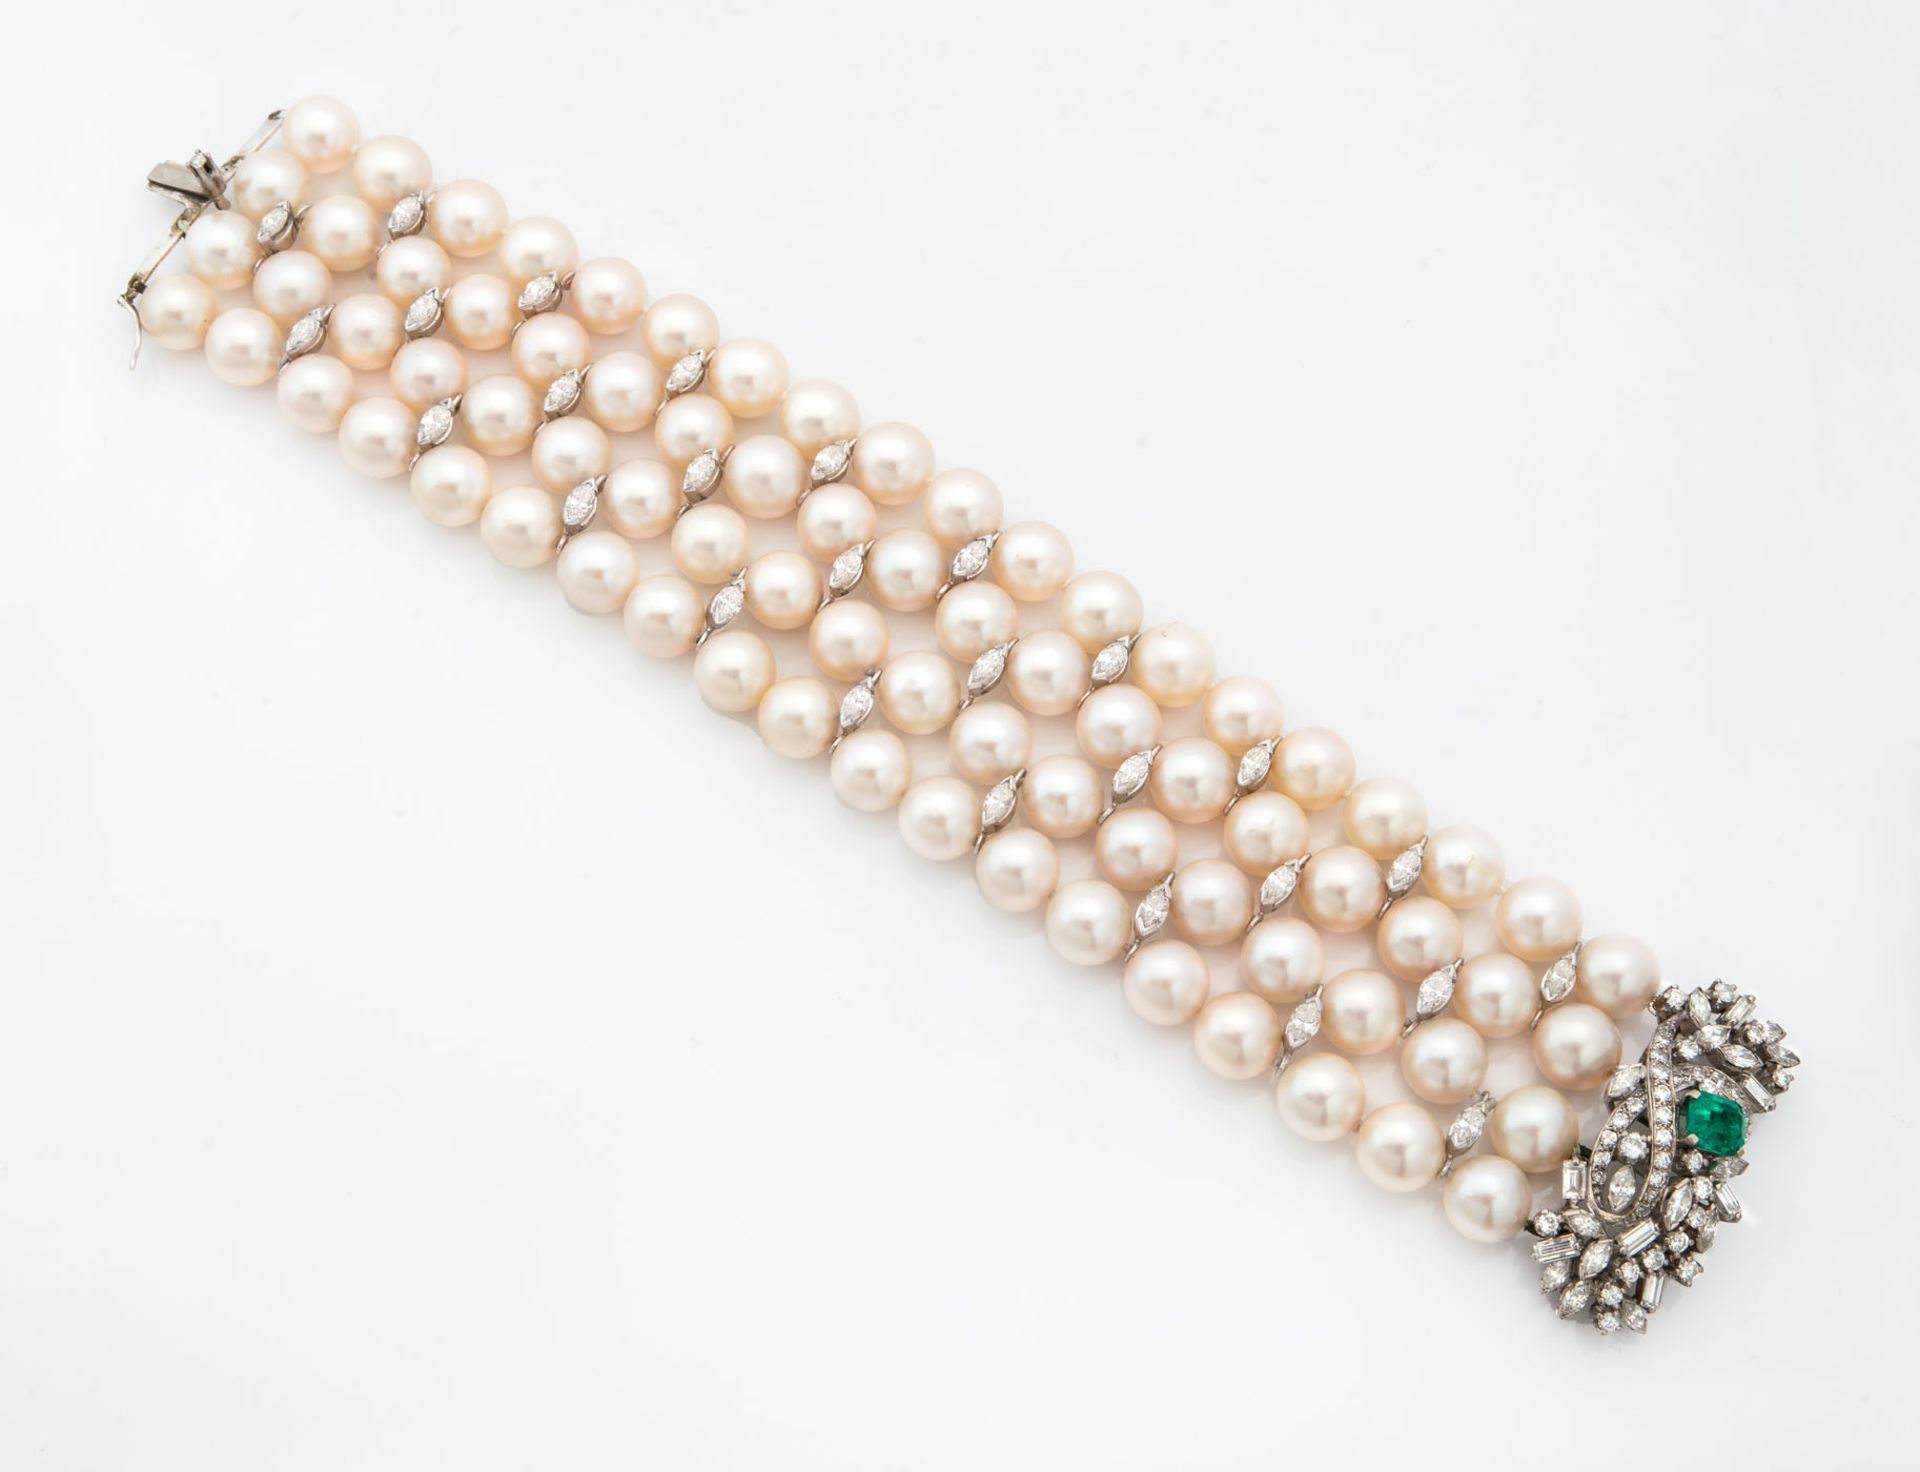 An Exquisite Gold Pearl Diamond and Emerald Bracelet - Image 3 of 3